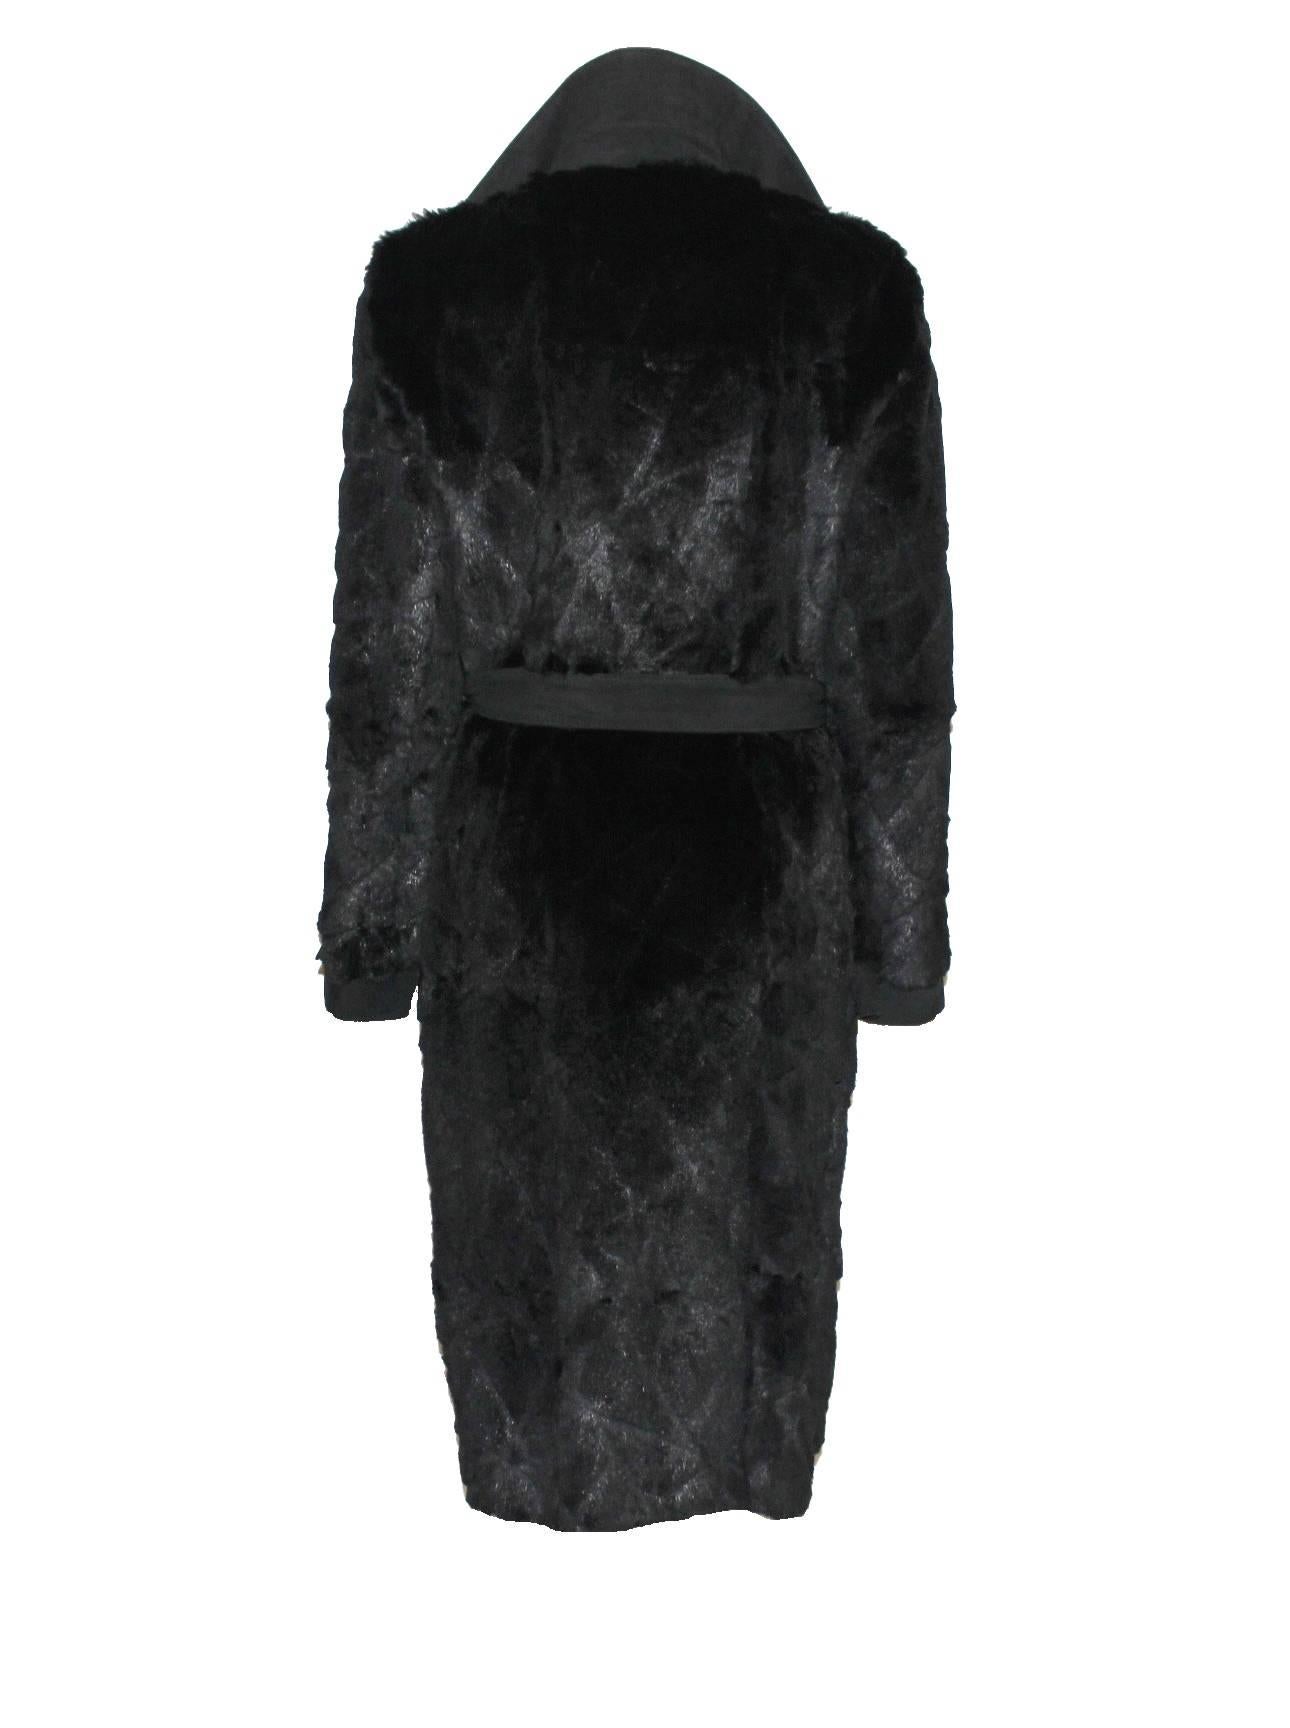 

    A great piece  by GIANNI VERSACE COUTURE
Worn by Gisele on the runway
    This gorgeous coat is made out of finest jet black fur (composition tag is missing, probably trimmed mink?) with asymmetric laser cut details
    Suede leather